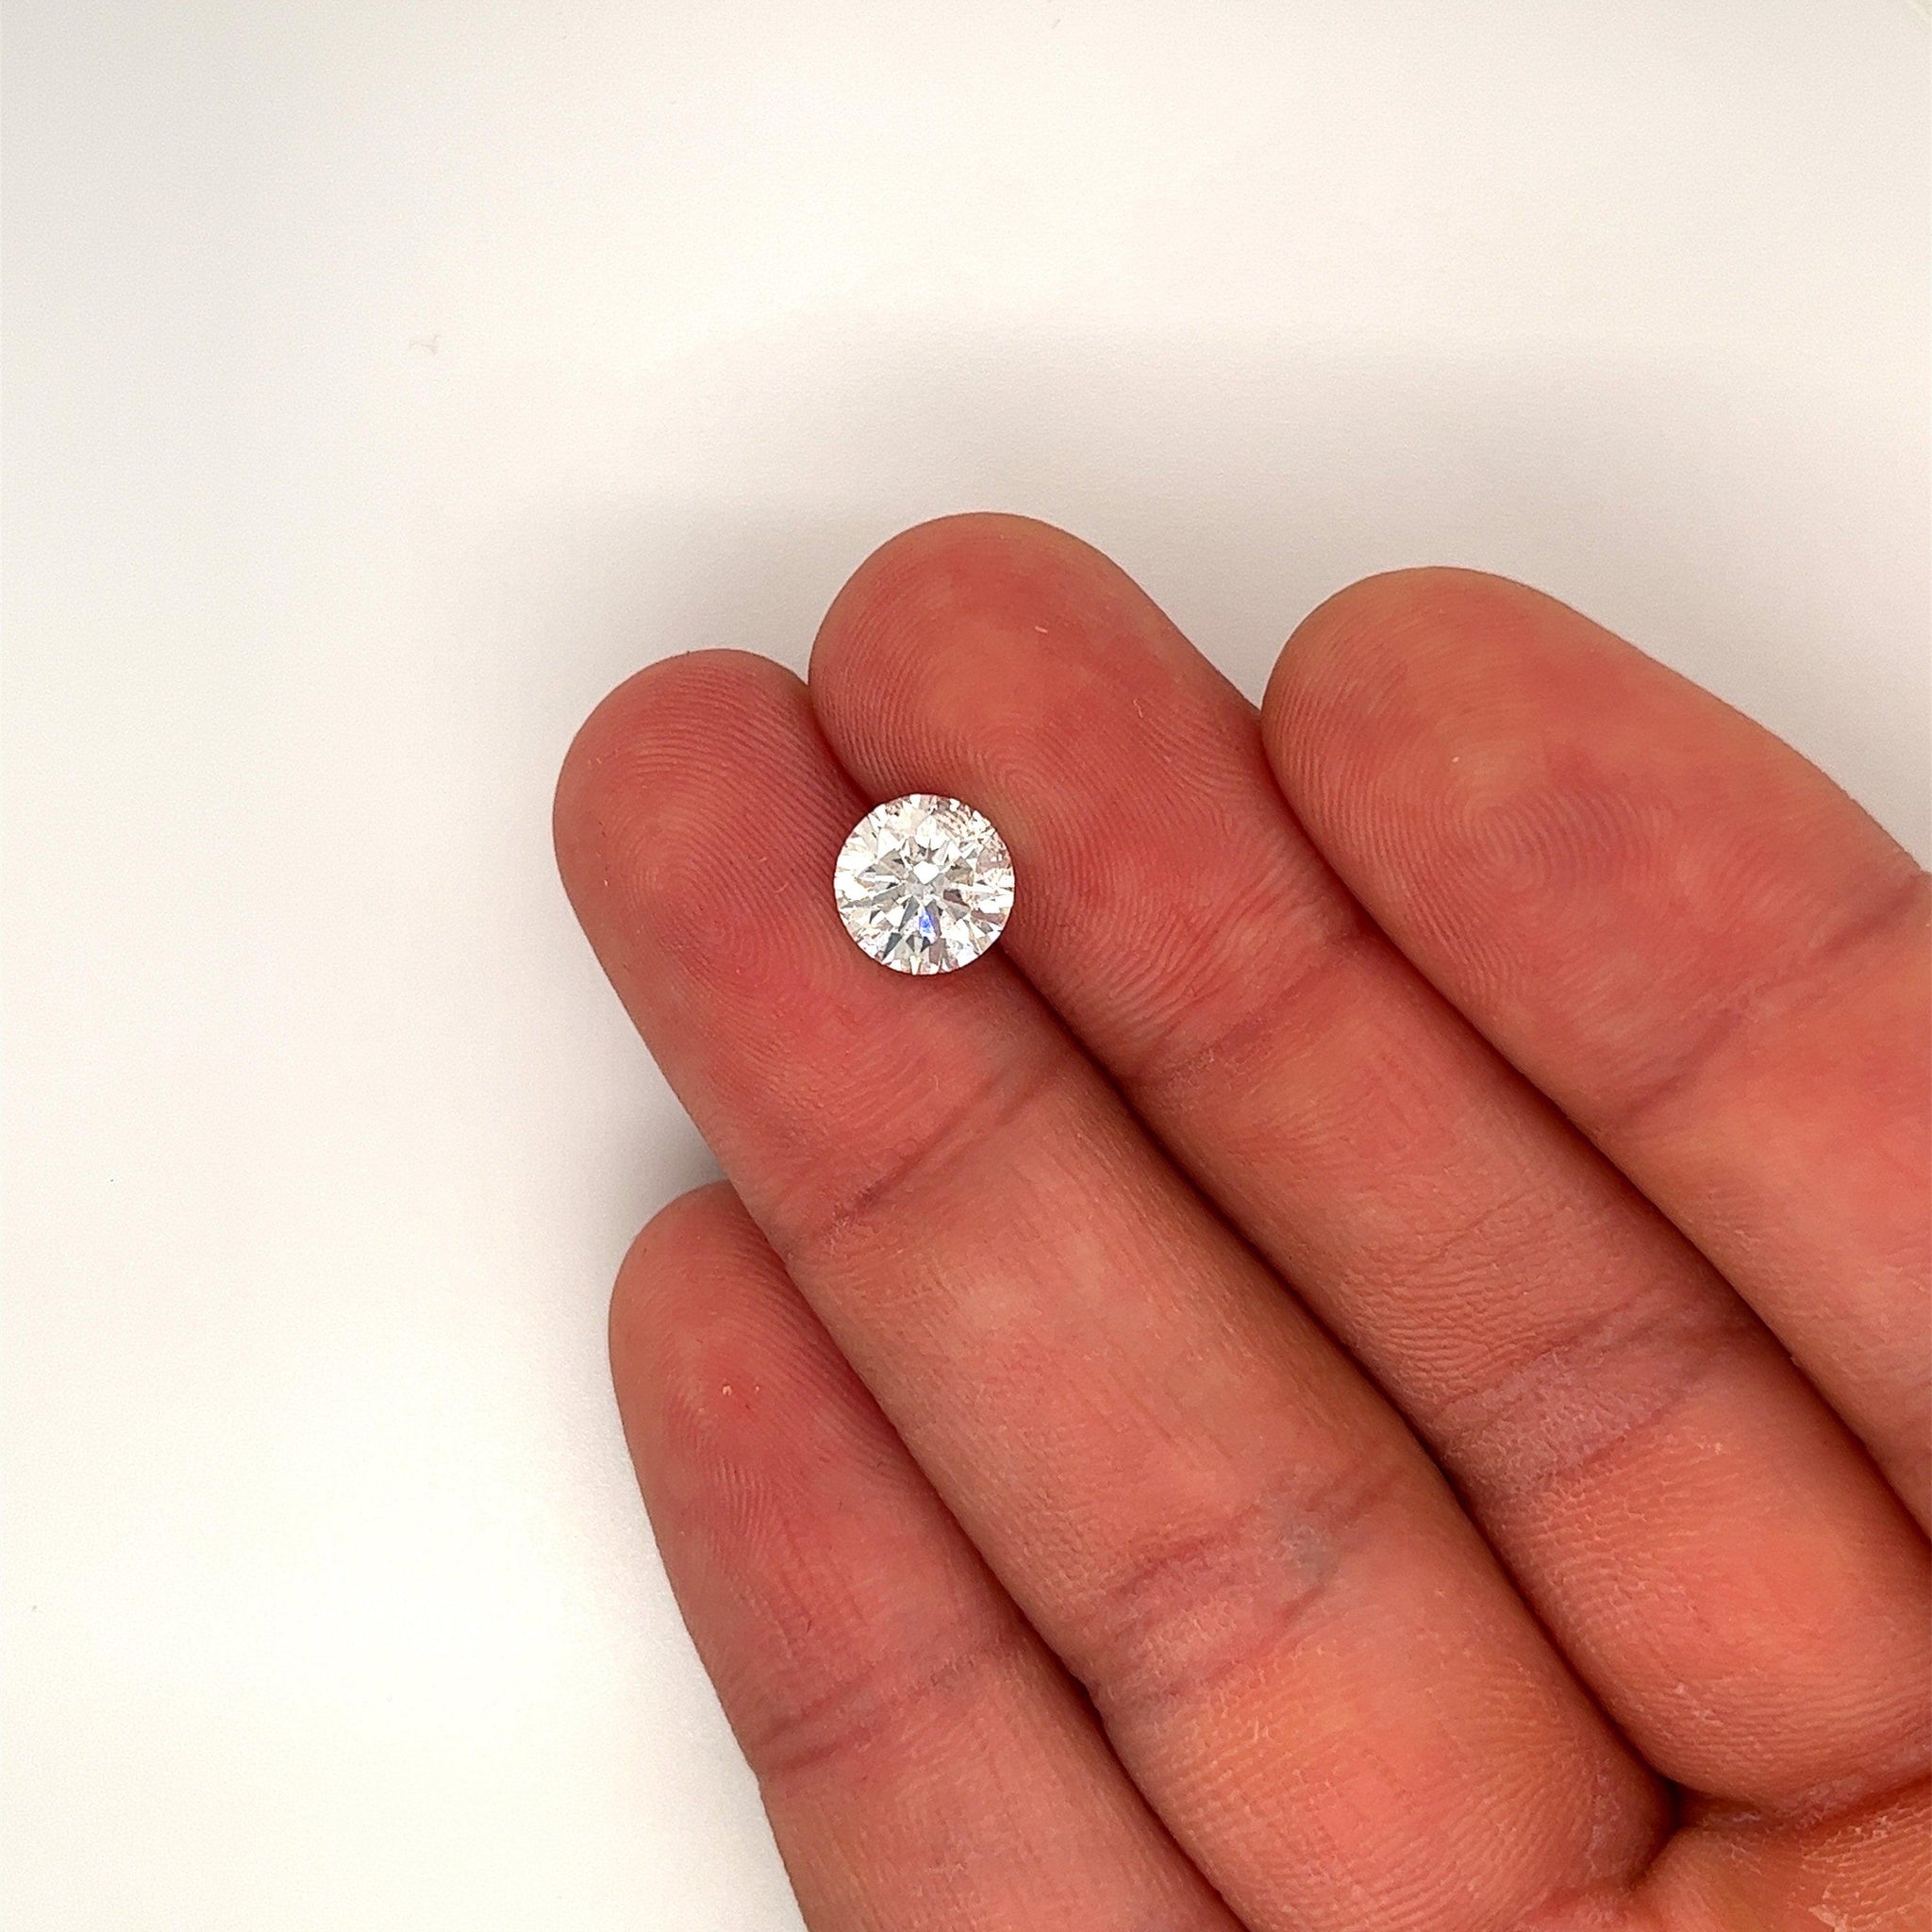 GIA Certified Natural 1.72 Carat Loose Diamond Round-Brilliant-Cut H Color - I1 Clarity - Excellent Cut-Loose Stones-ASSAY